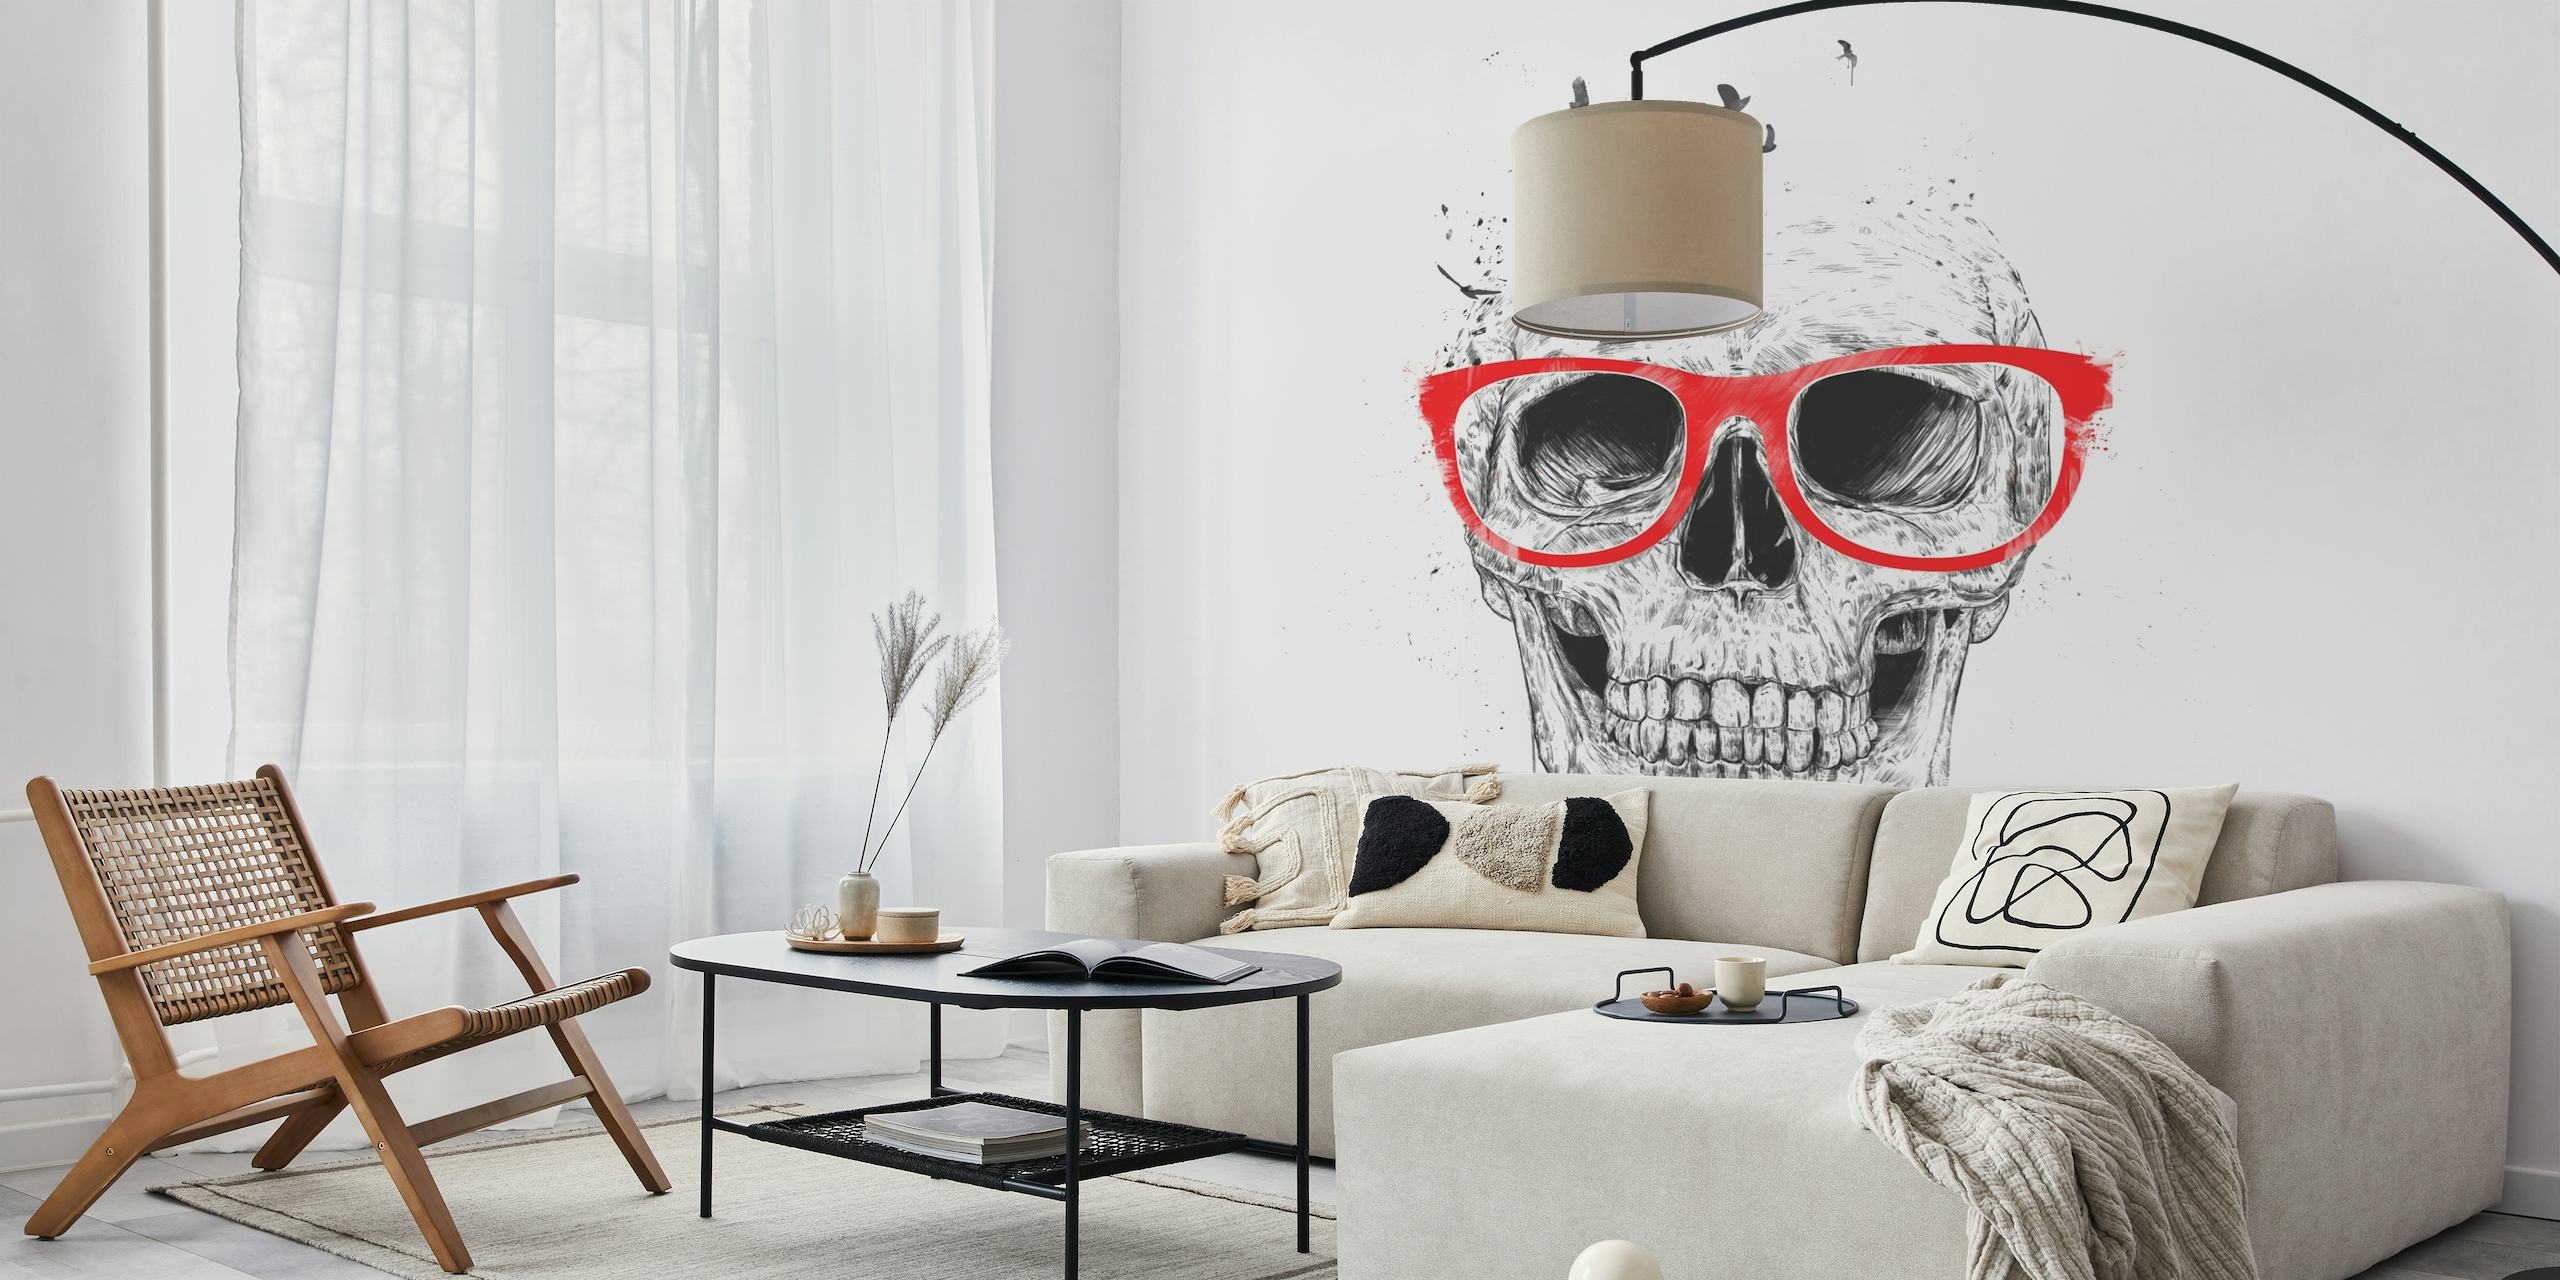 Skull with red glasses papel pintado